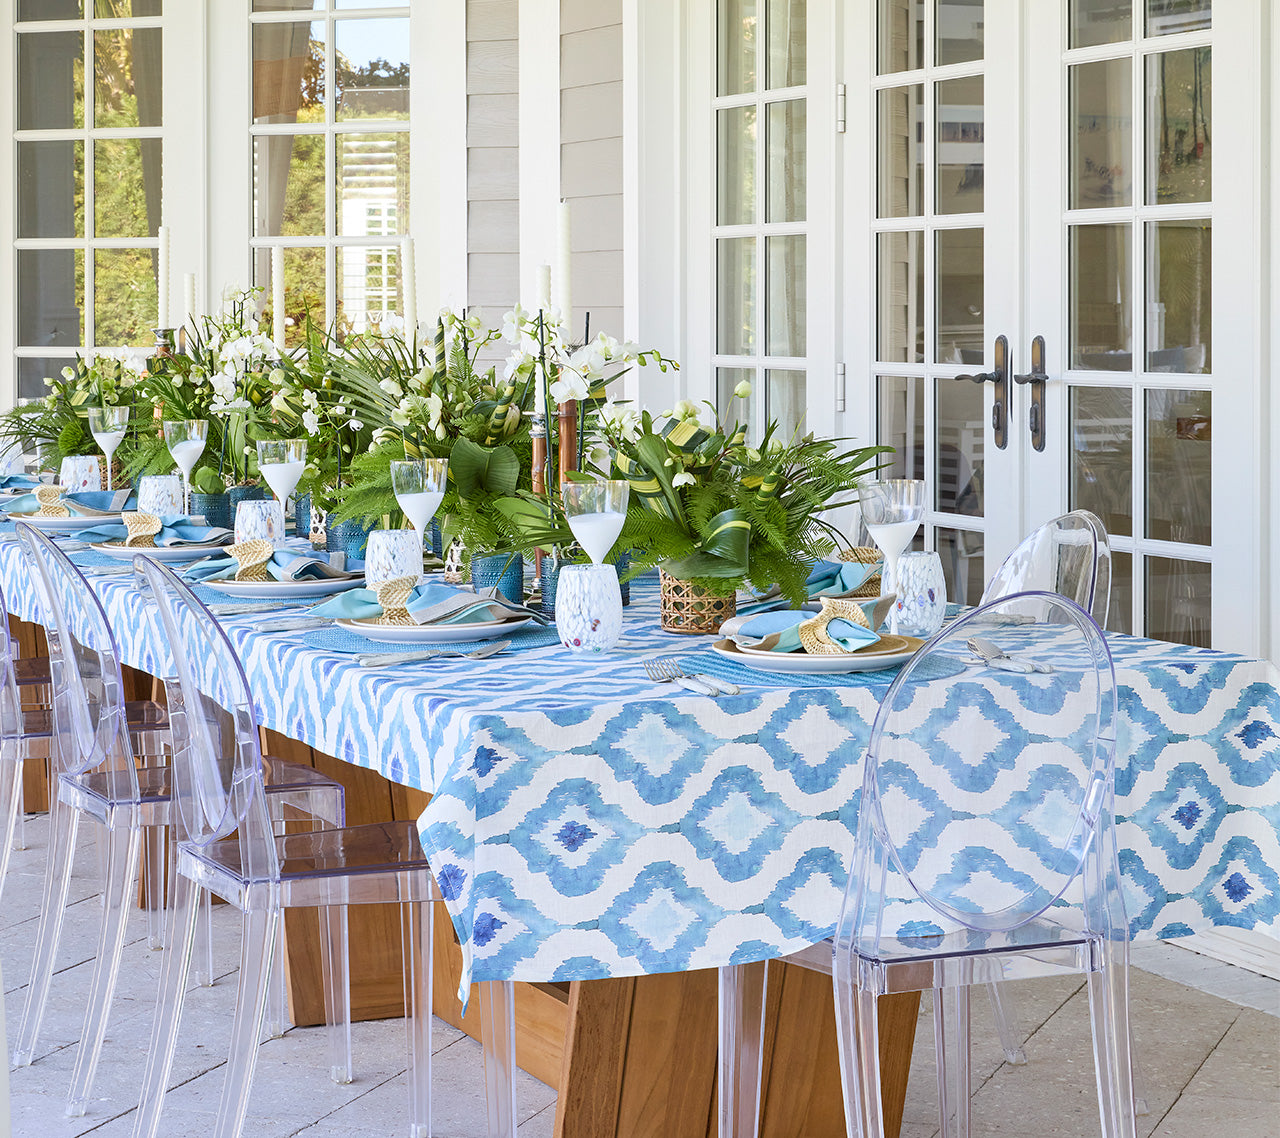 Linen Watercolor Ikat Tablecloth with a bright blue, geometric pattern inspired by traditional Indonesian Ikat textile-making process.